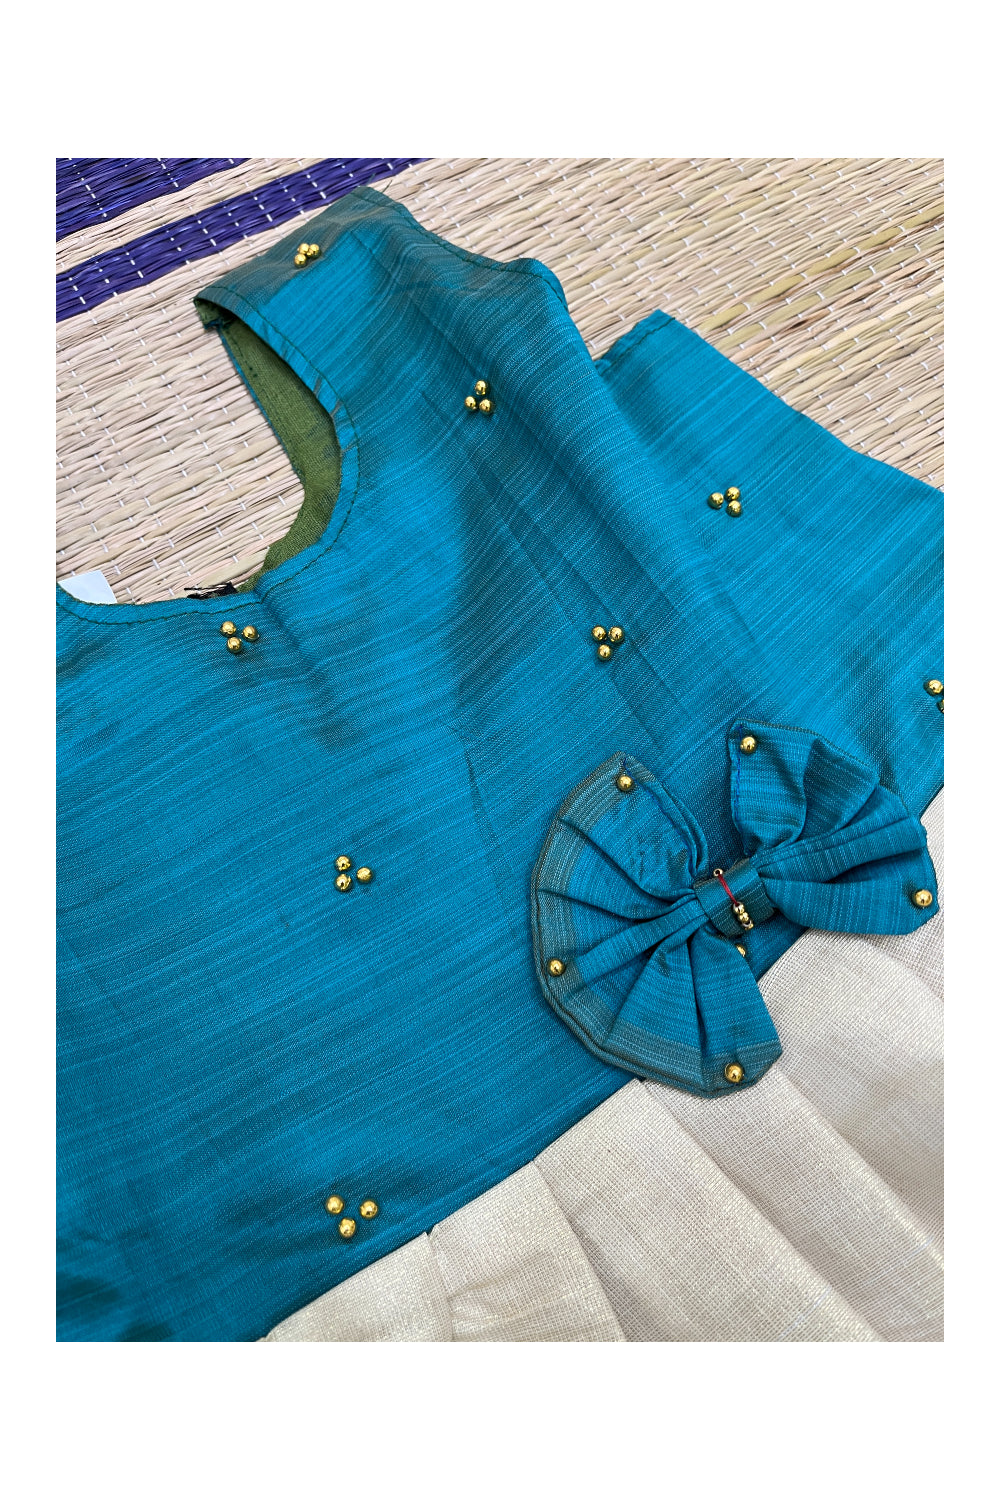 Southloom Kerala Tissue Frock with Green Bead Work Designs for Kids (5 Years)